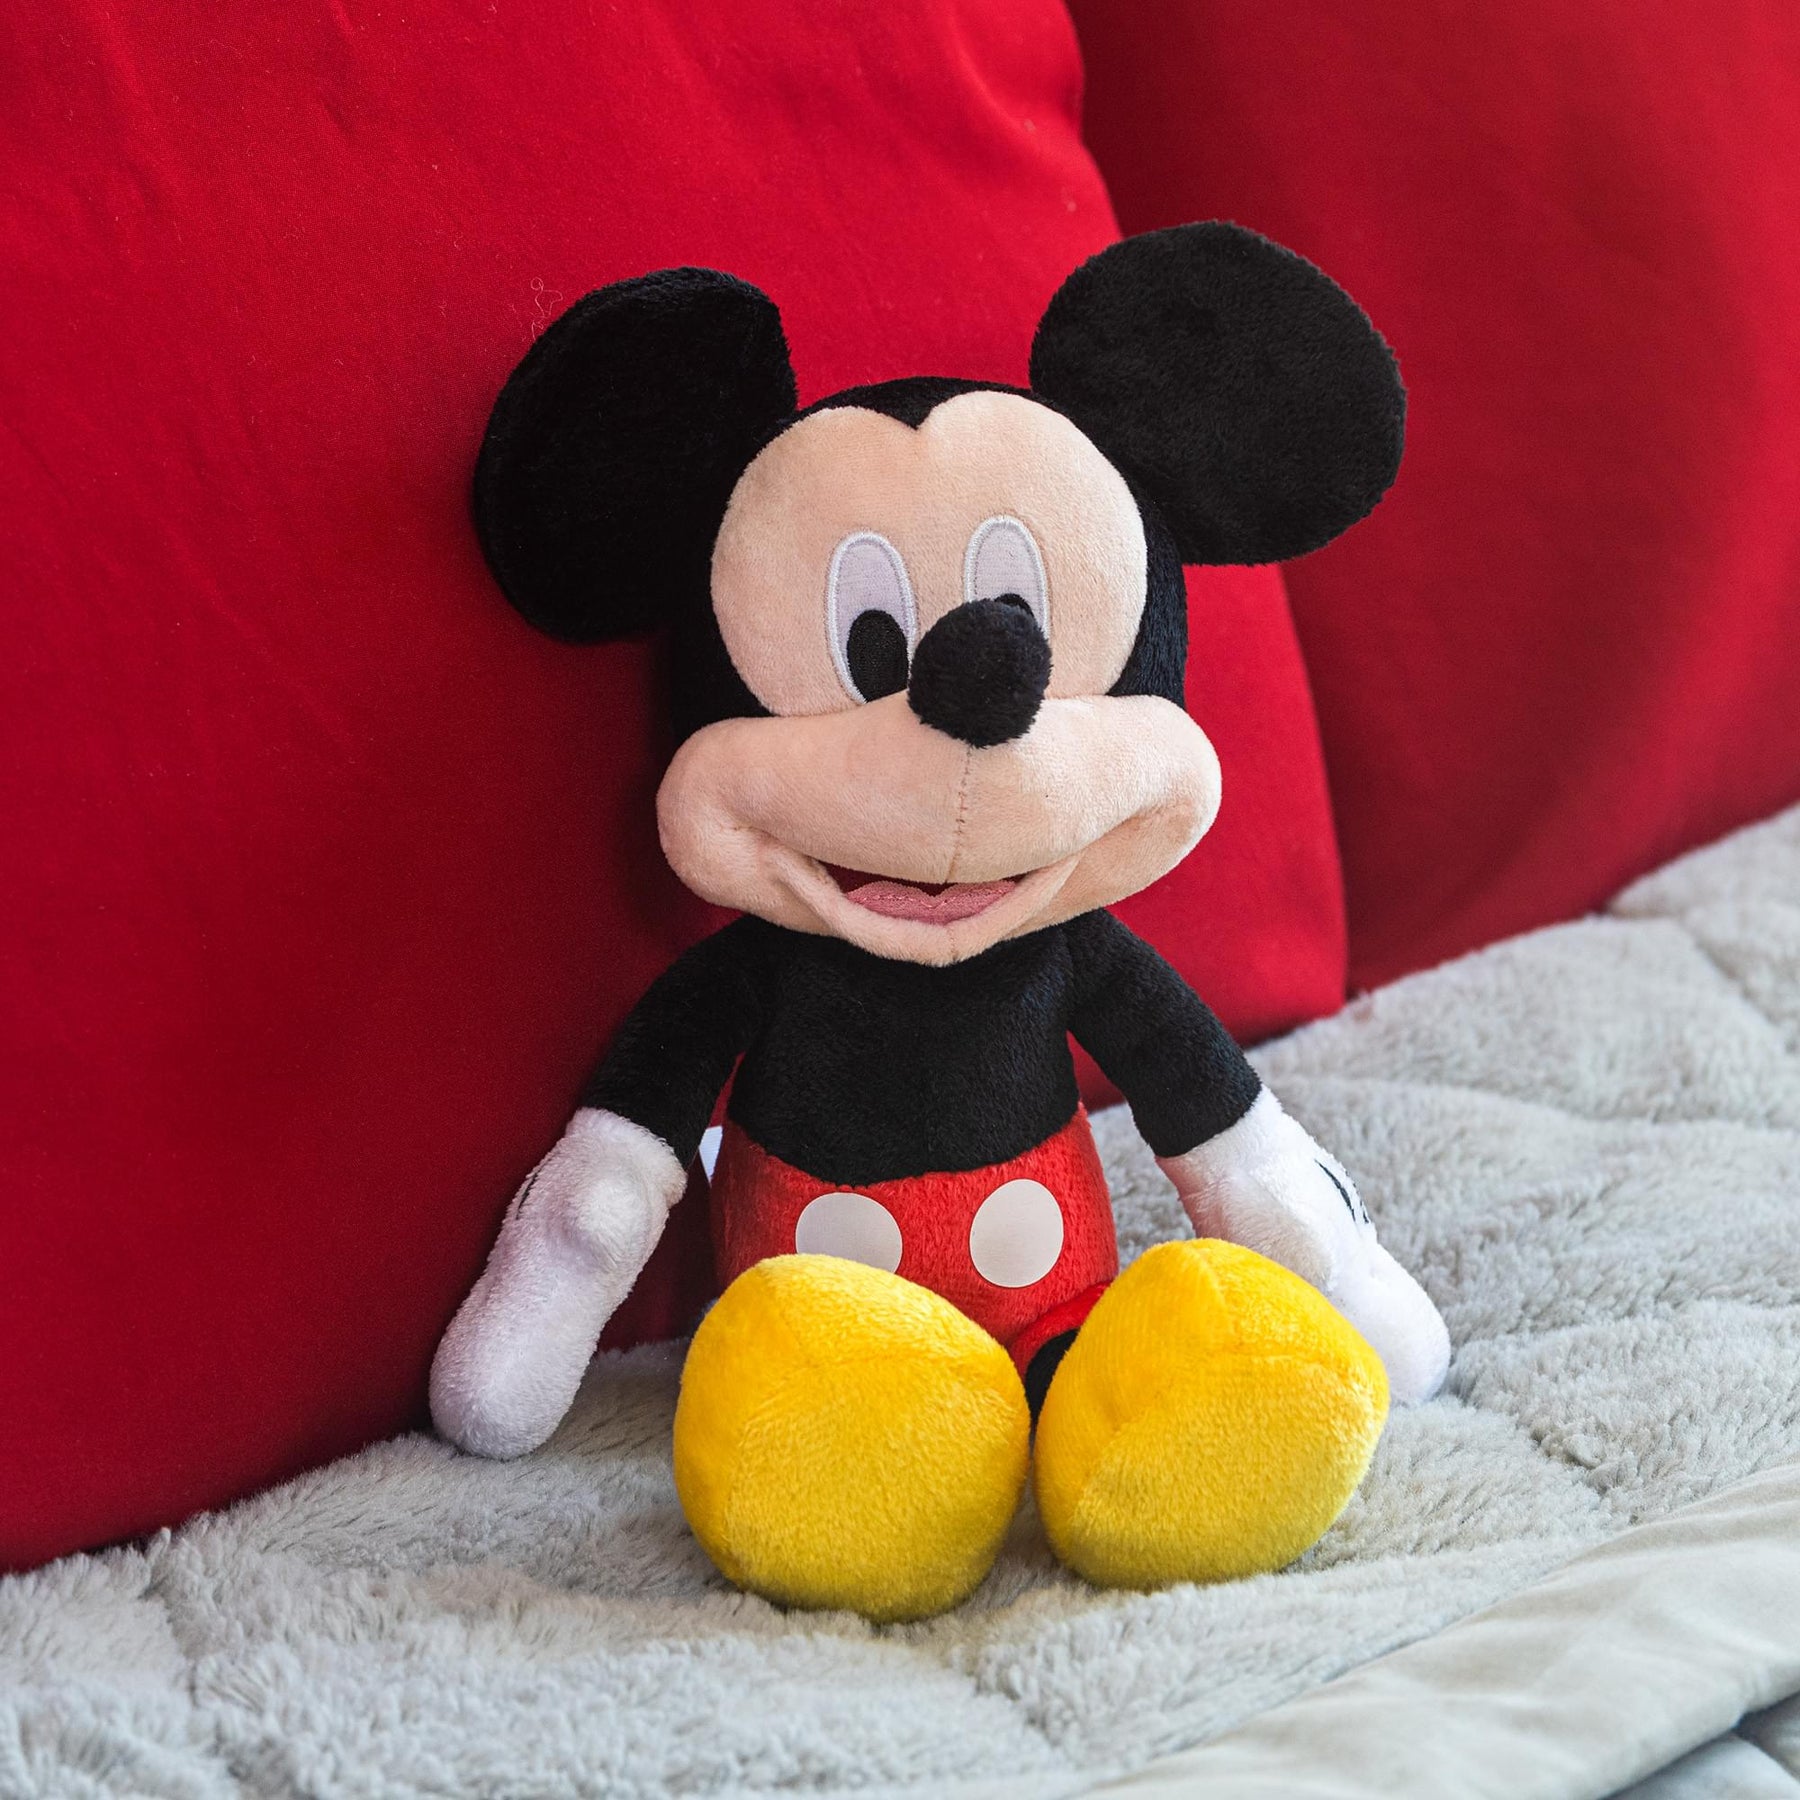 Disney Mickey Mouse 11 inch Child Plush Toy Stuffed Character Doll